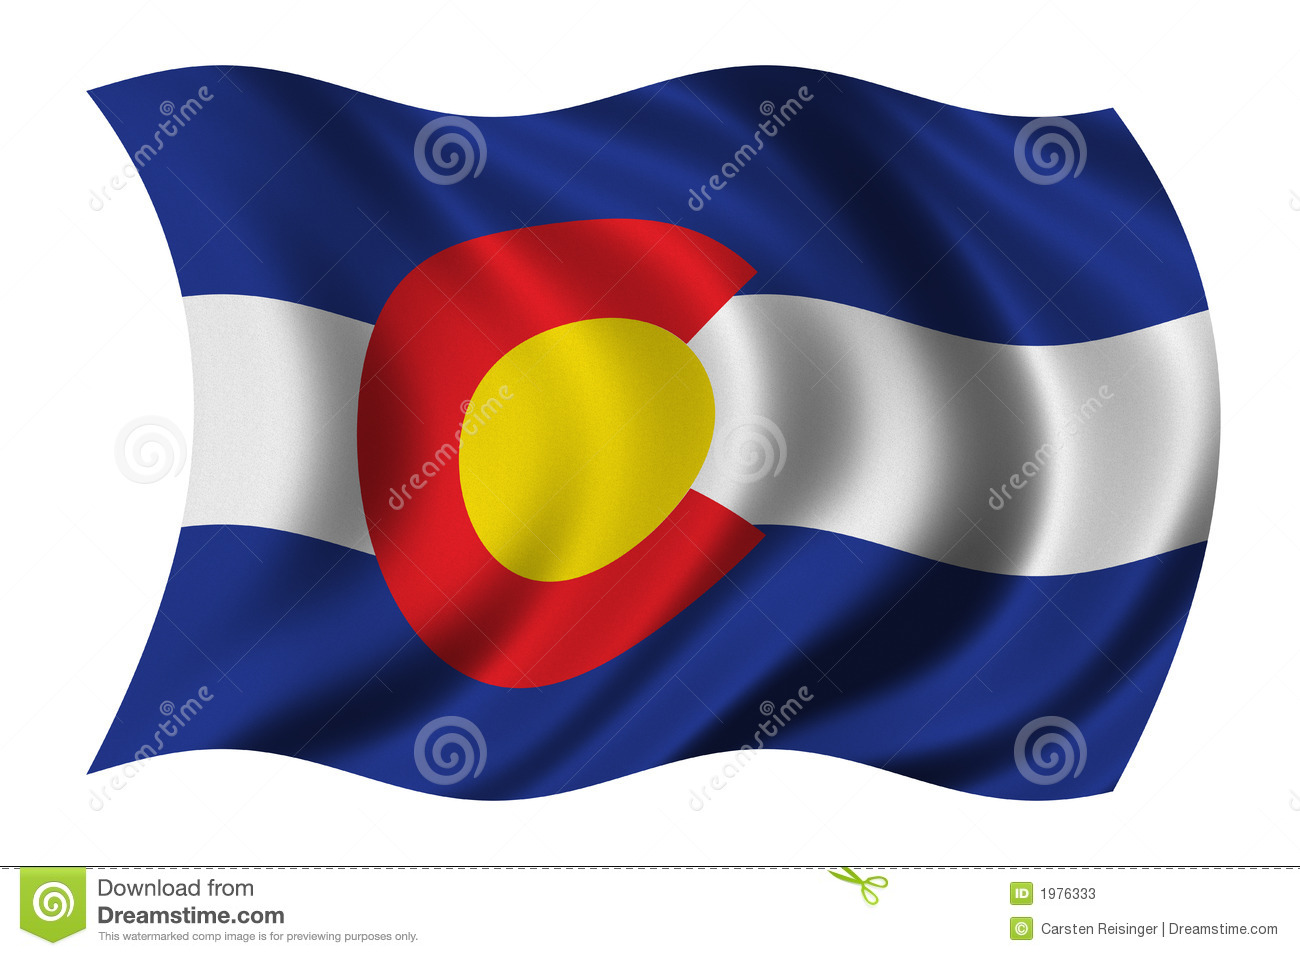 Colorado Flag iPad Wallpaper State Pictures